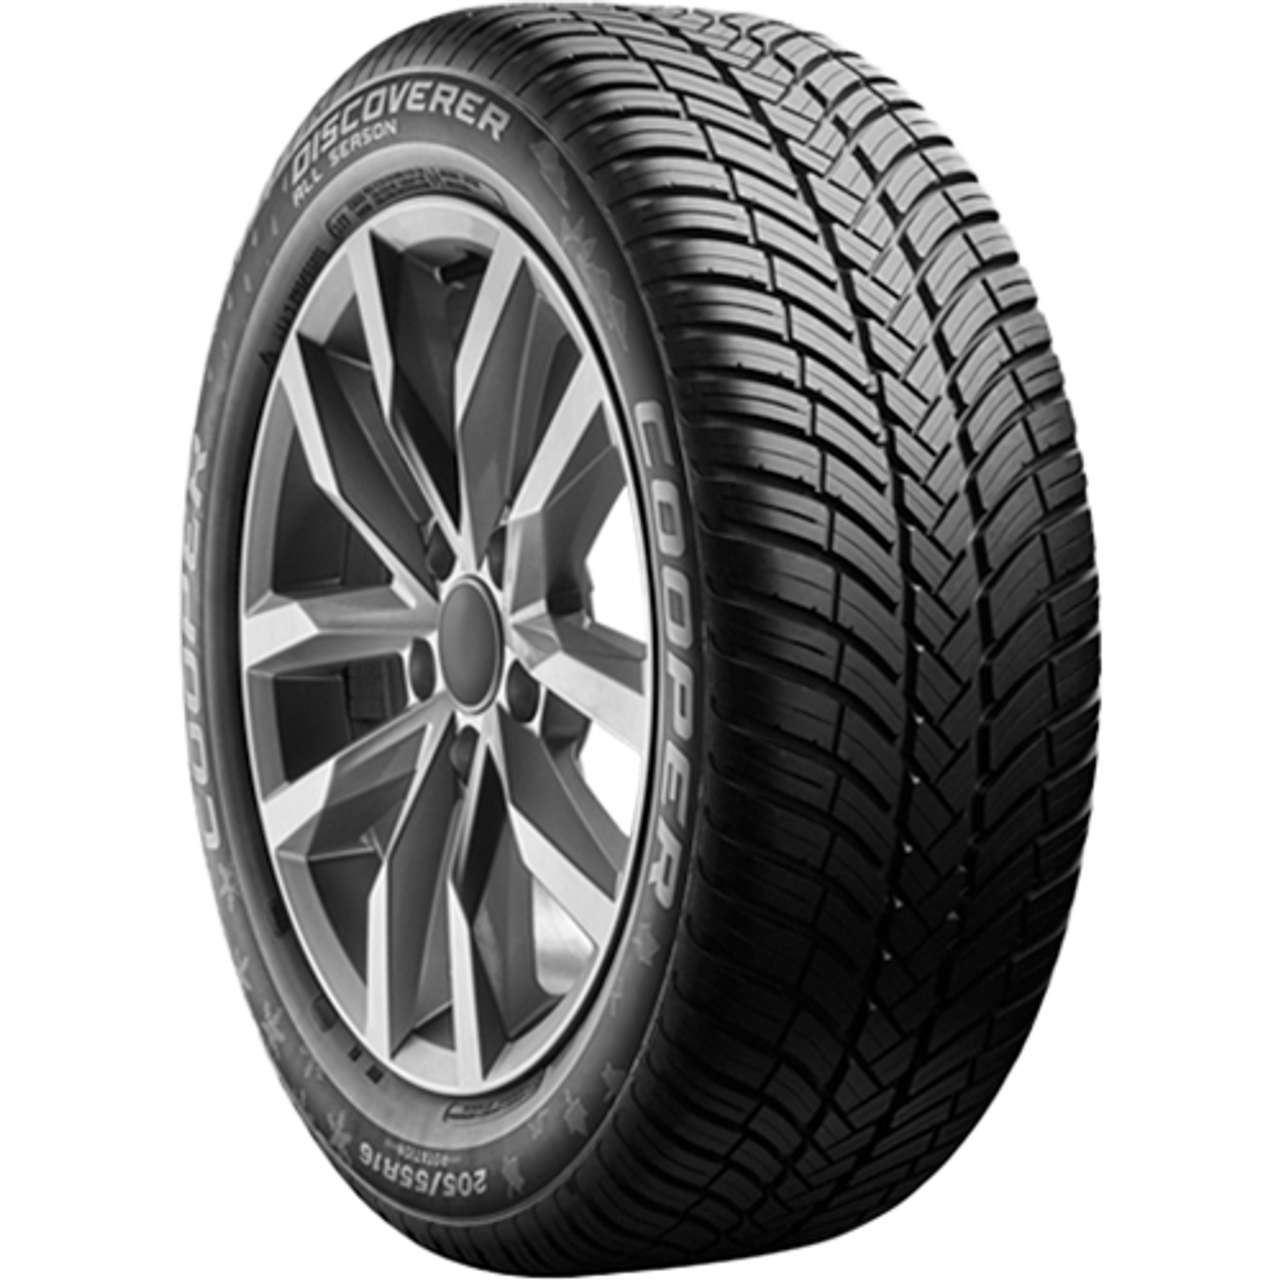 COOPER DISCOVERER ALL SEASON 225/55R17 101W BSW